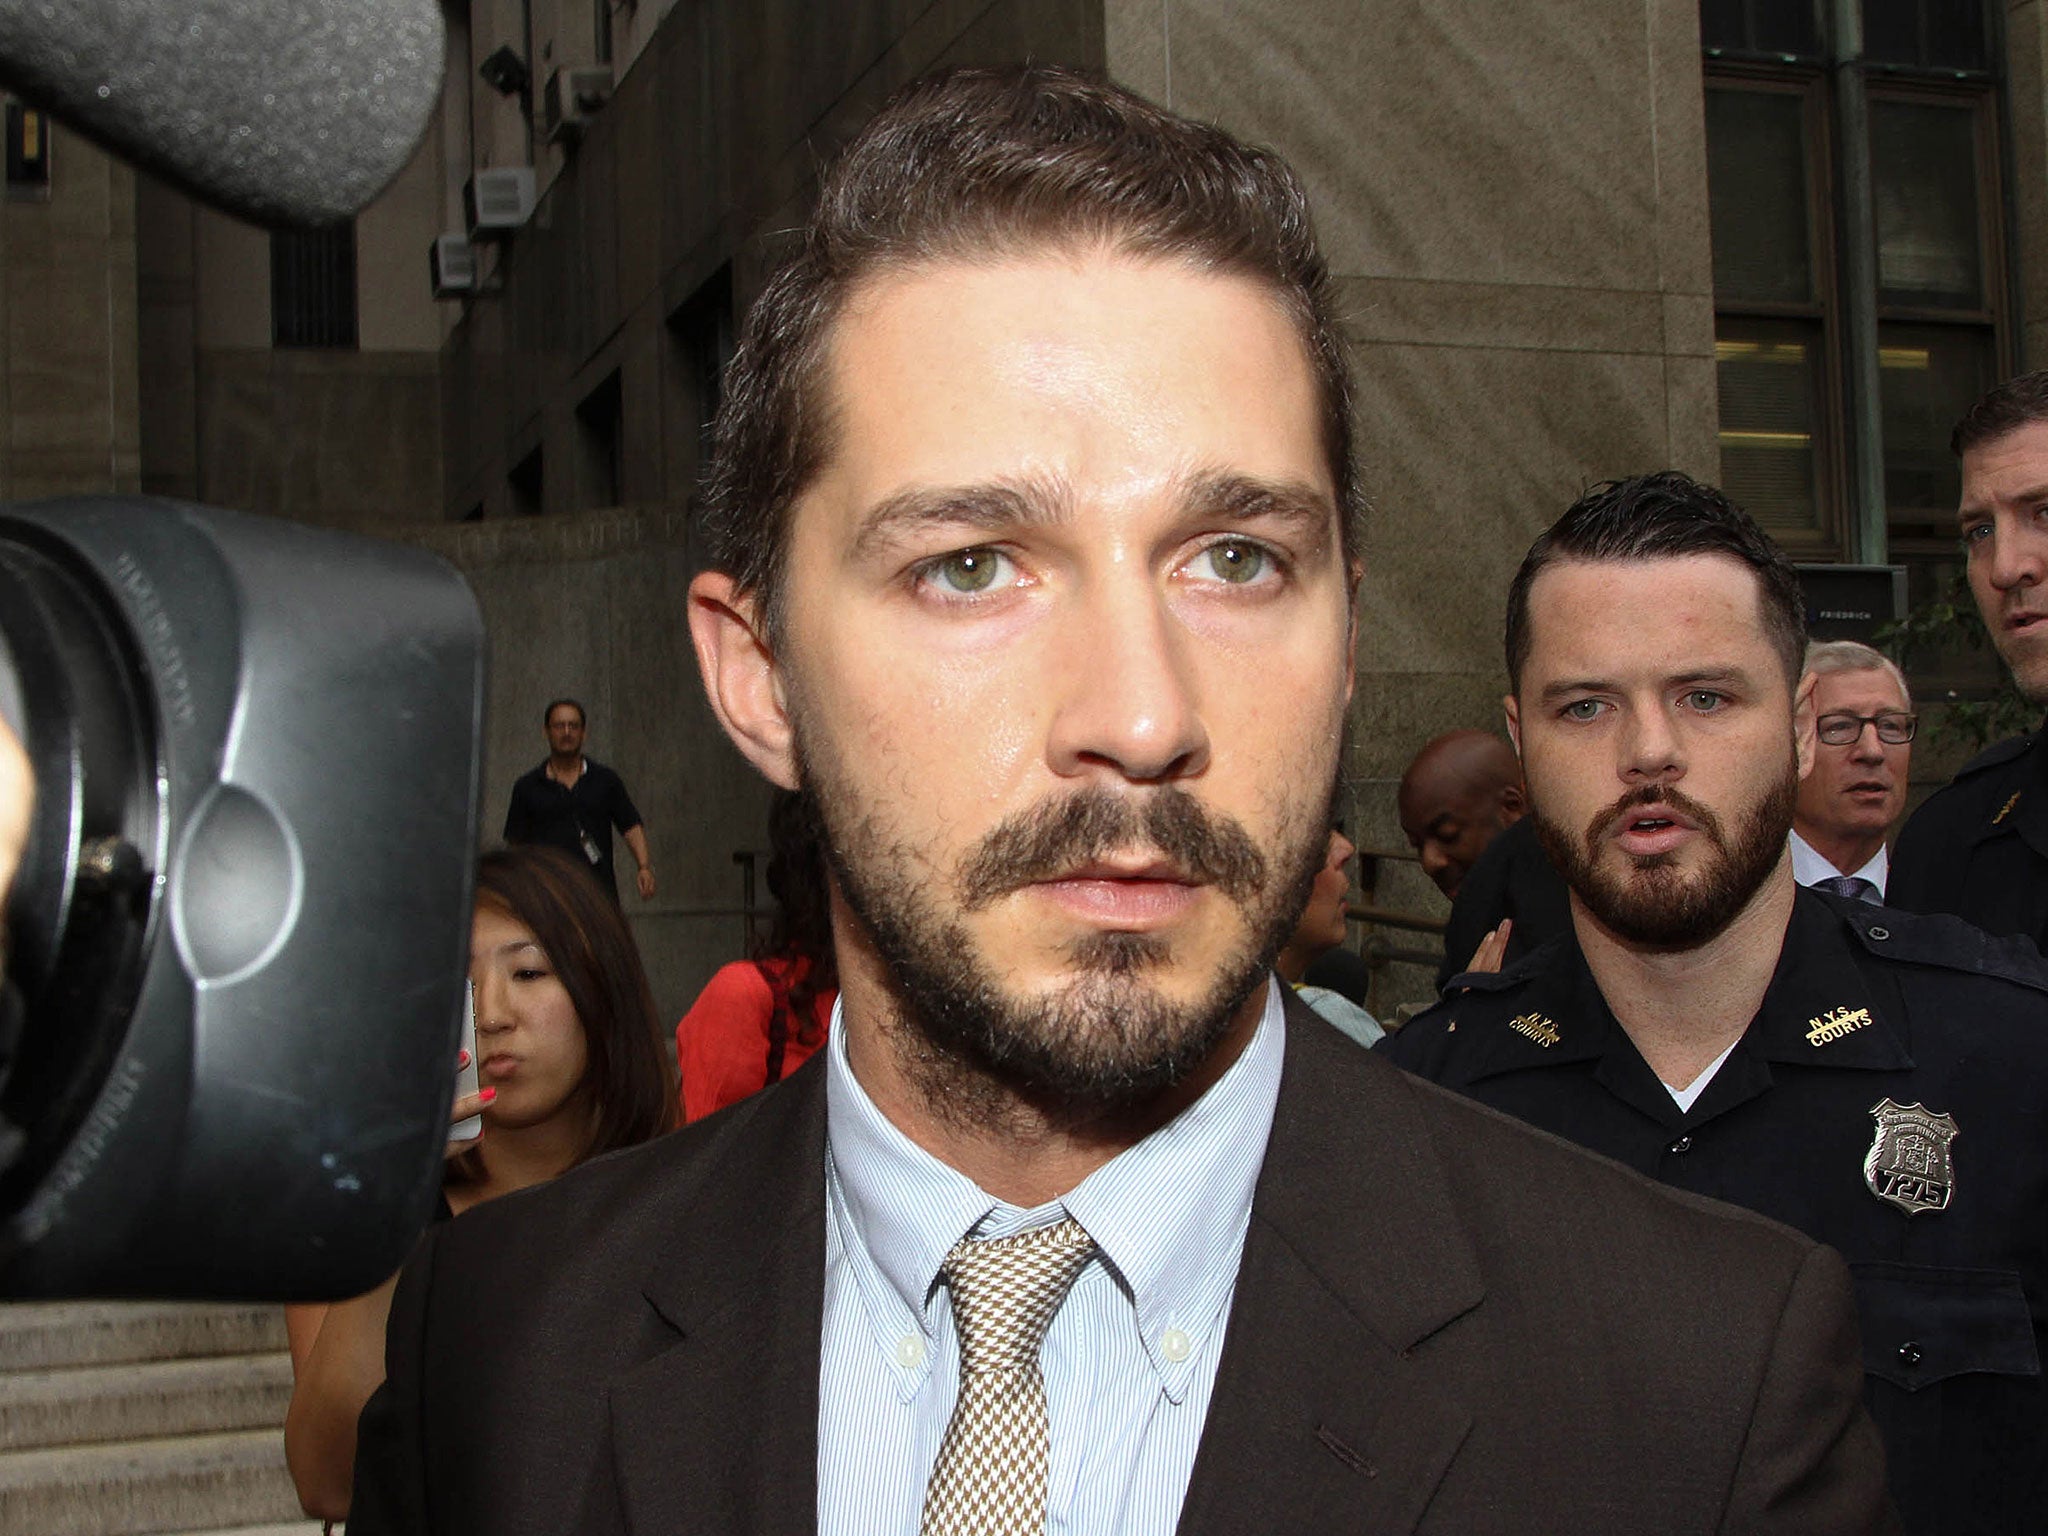 Actor Shia LaBeouf leaves criminal court on 24 July, 2014, in New York City